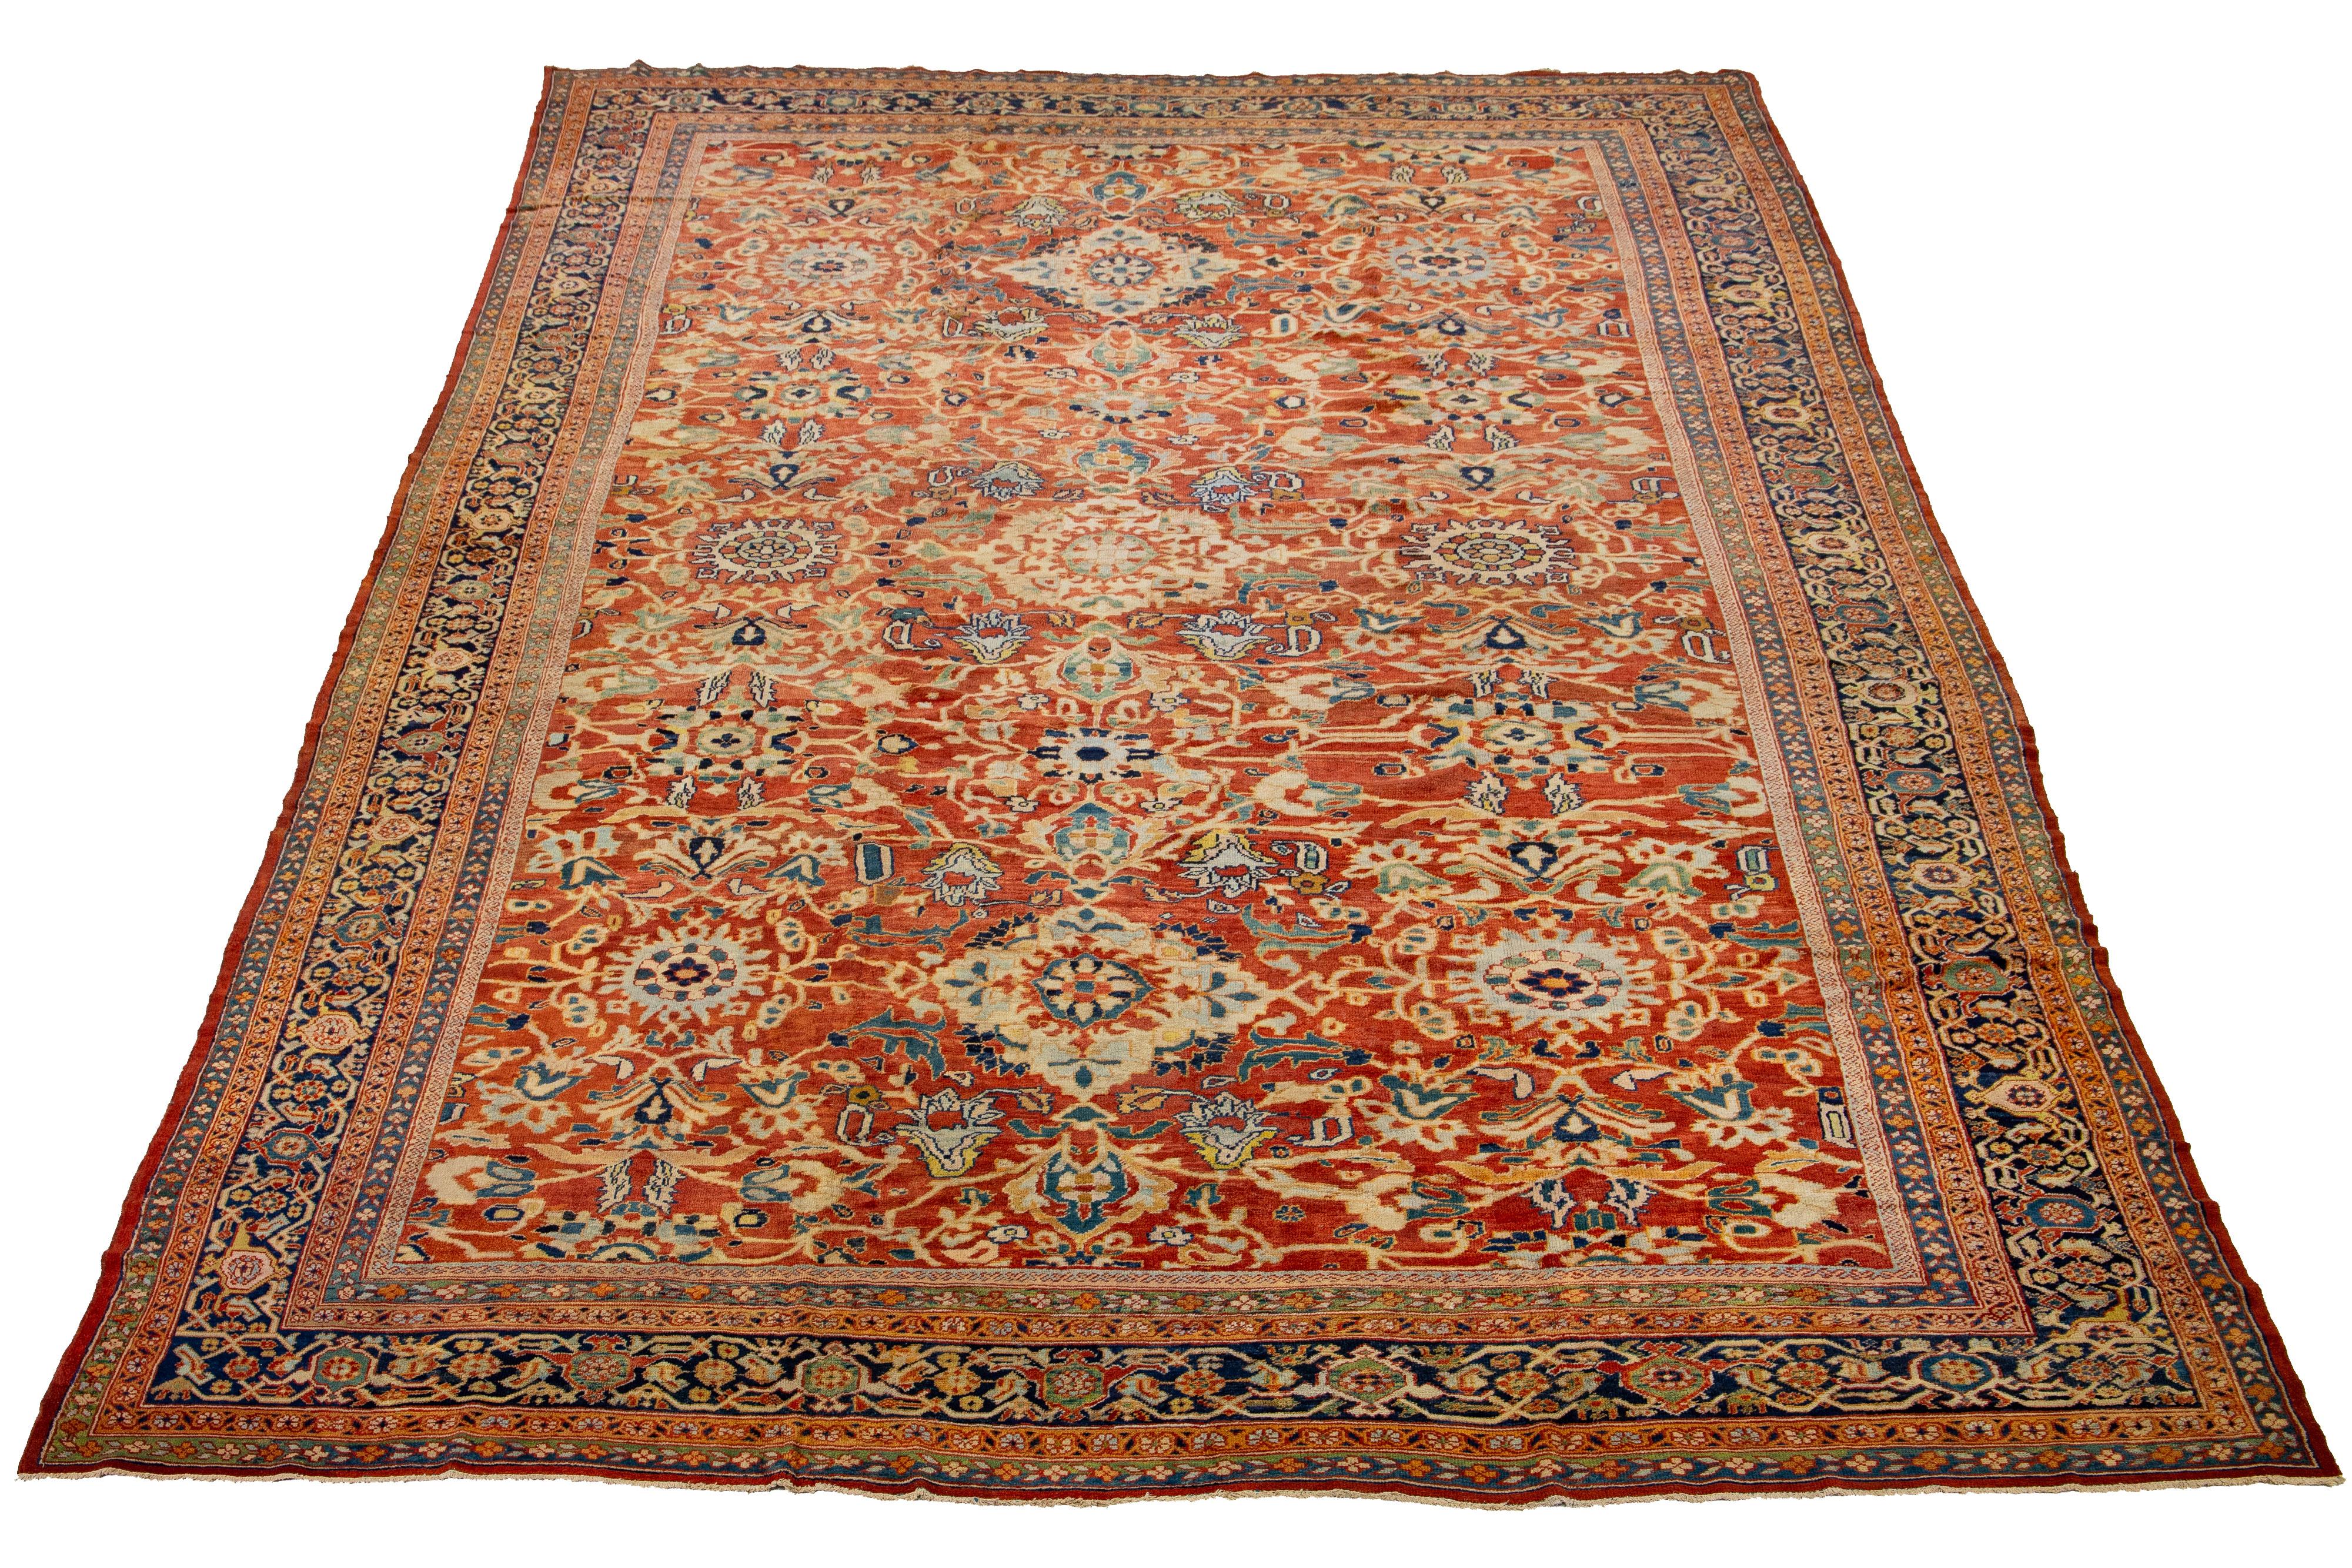 This stunning one-of-a-kind hand-knotted wool rug is an antique oversized Sultanabad from the 1890s. It features a red rust field with multicolored accents in a floral design. The strong wool weave of this classic rug design is achieved through